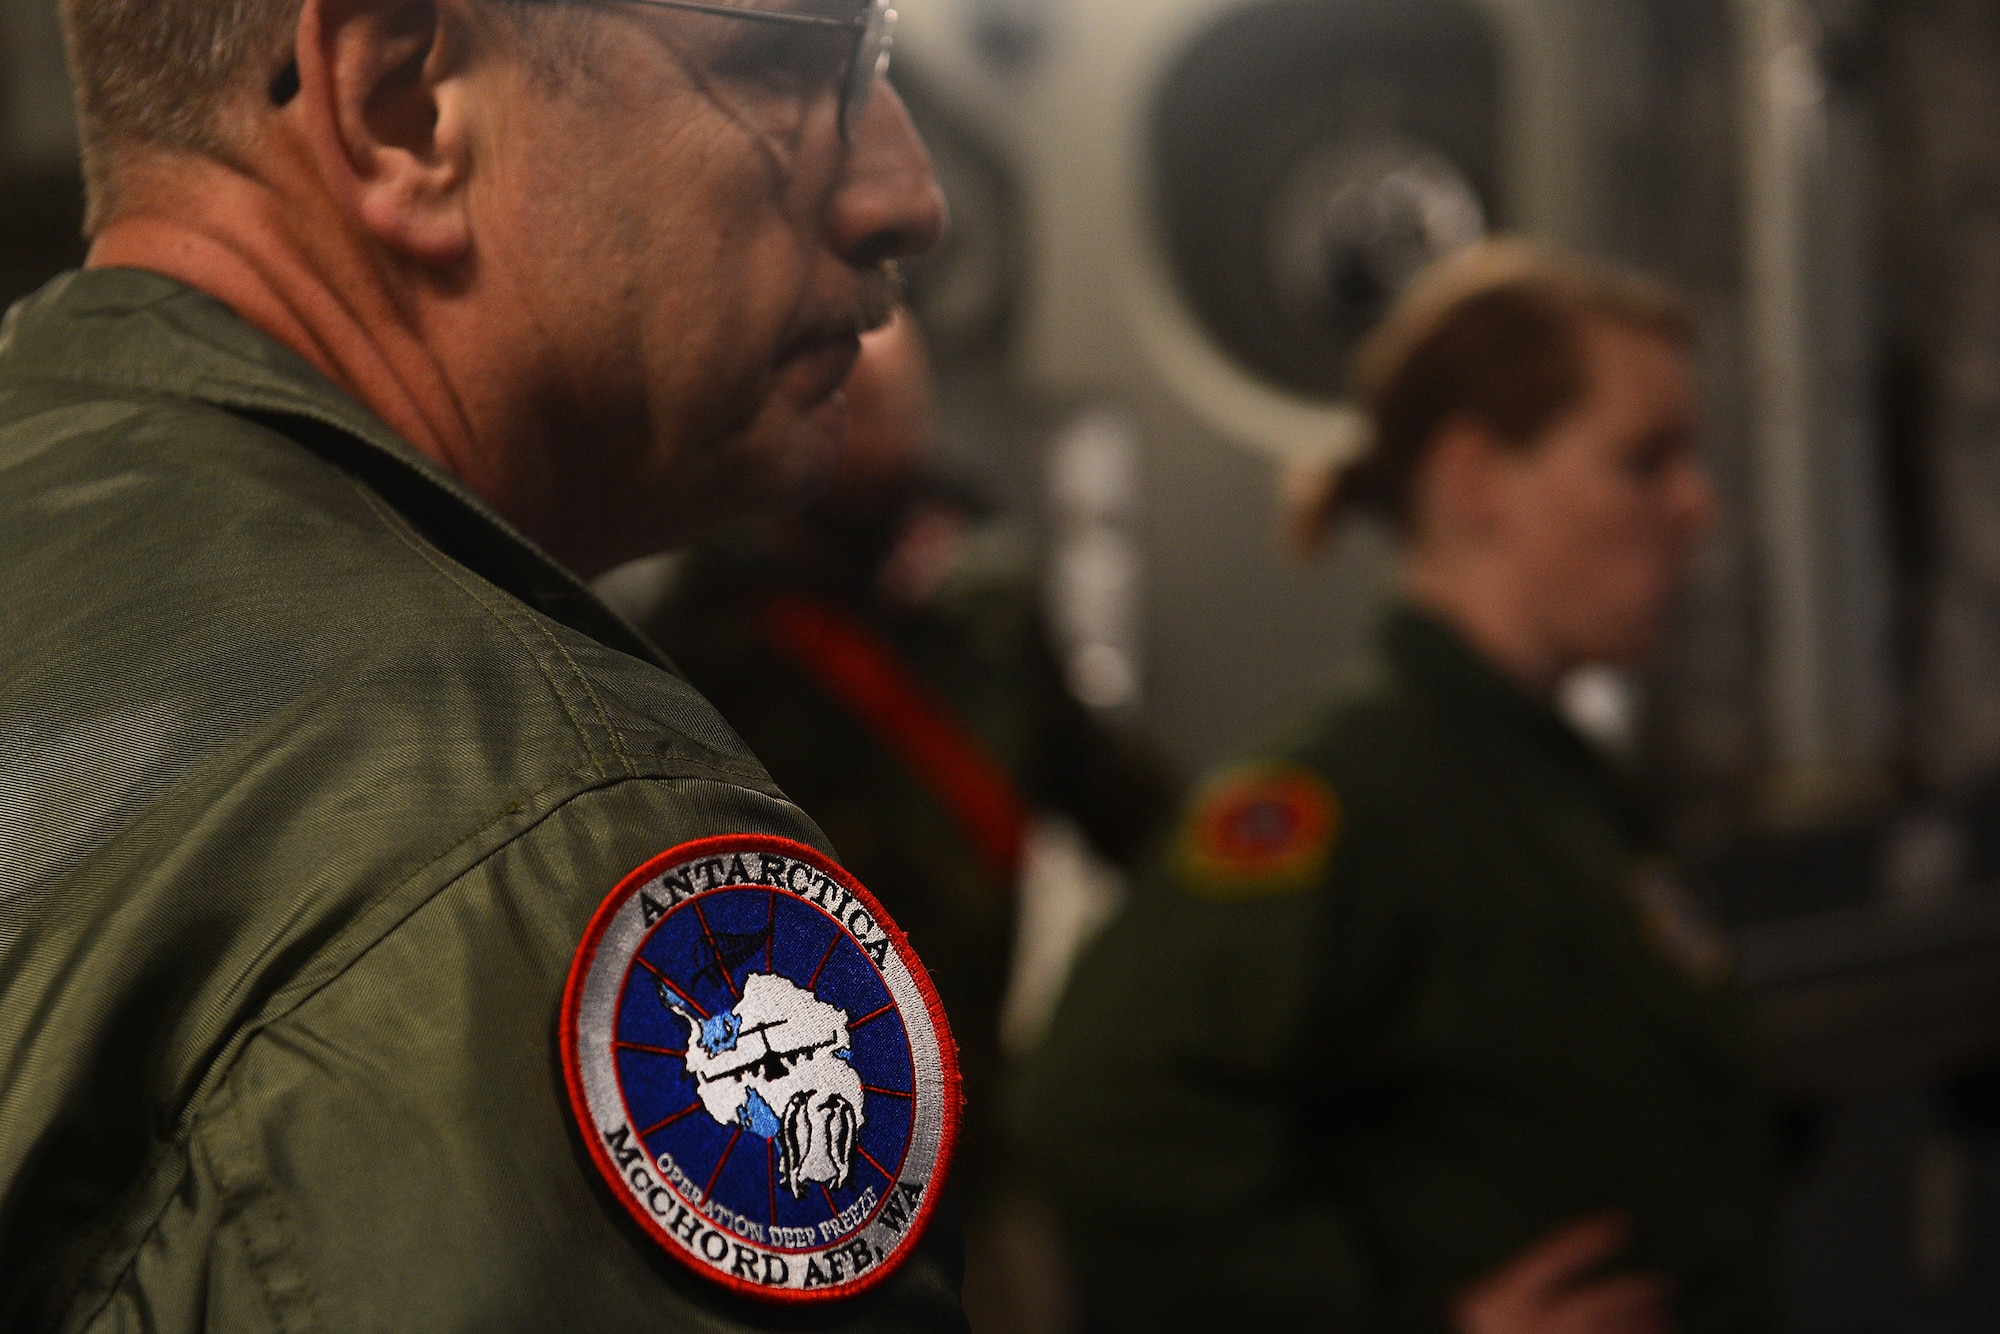 Chief Master Sgt. Ron Campeau, 446th Airlift Wing load master, loads cargo into a C-17 Globmaster III for Operation Deep Freeze Feb. 7, 2015 at Joint Base Lewis-McChord, Wash. Both the C-17 and Chief Campeau are in route to Antarctica to support the National Science Foundation. (U.S. Air Force photo\ Staff Sgt. Tim Chacon)